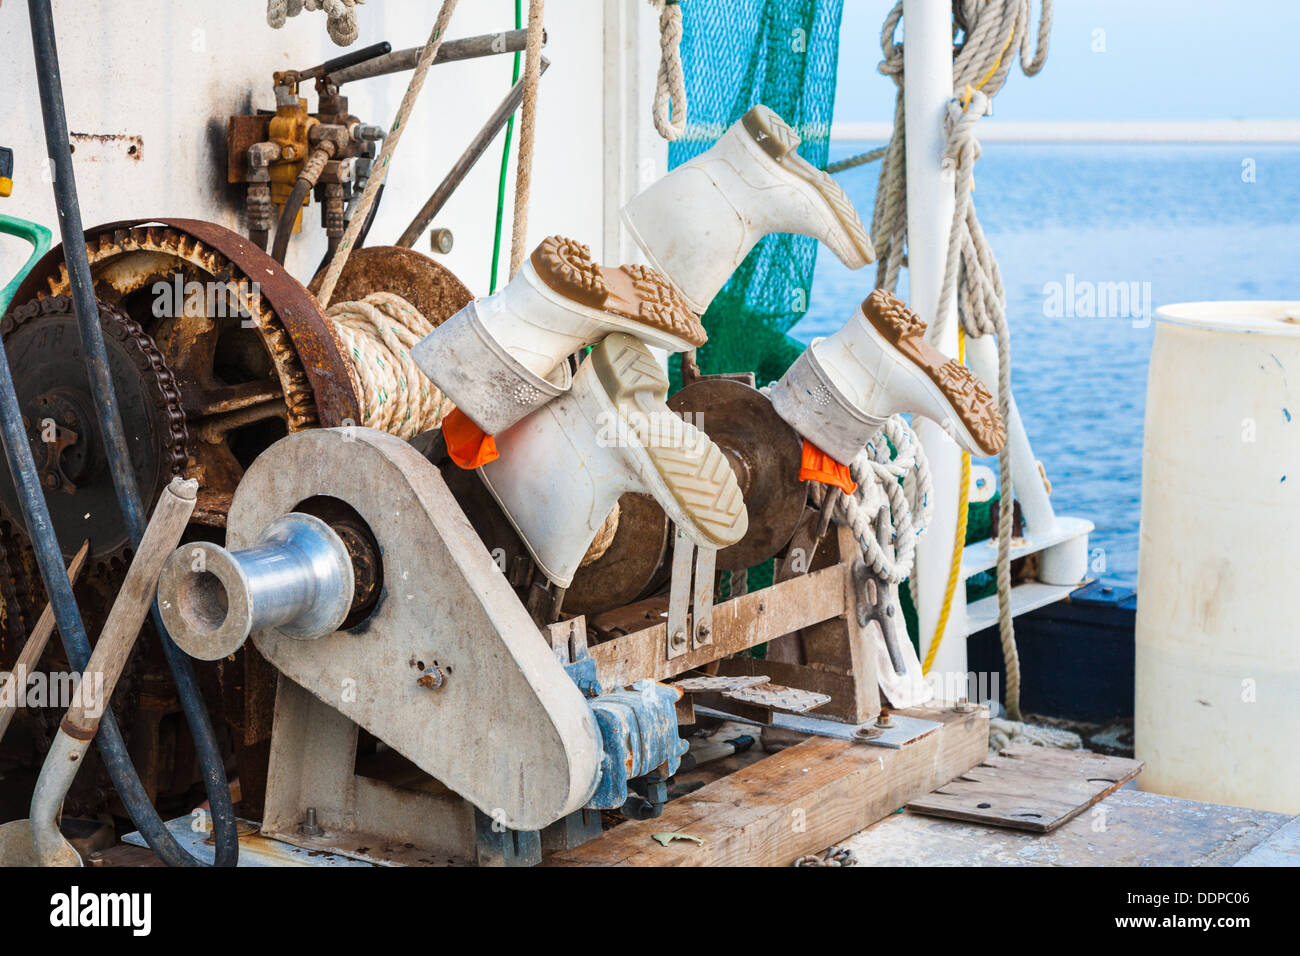 Wenches and work boots on a commercial fishing boat at the Small Craft Harbor in Biloxi, Mississippi Stock Photo